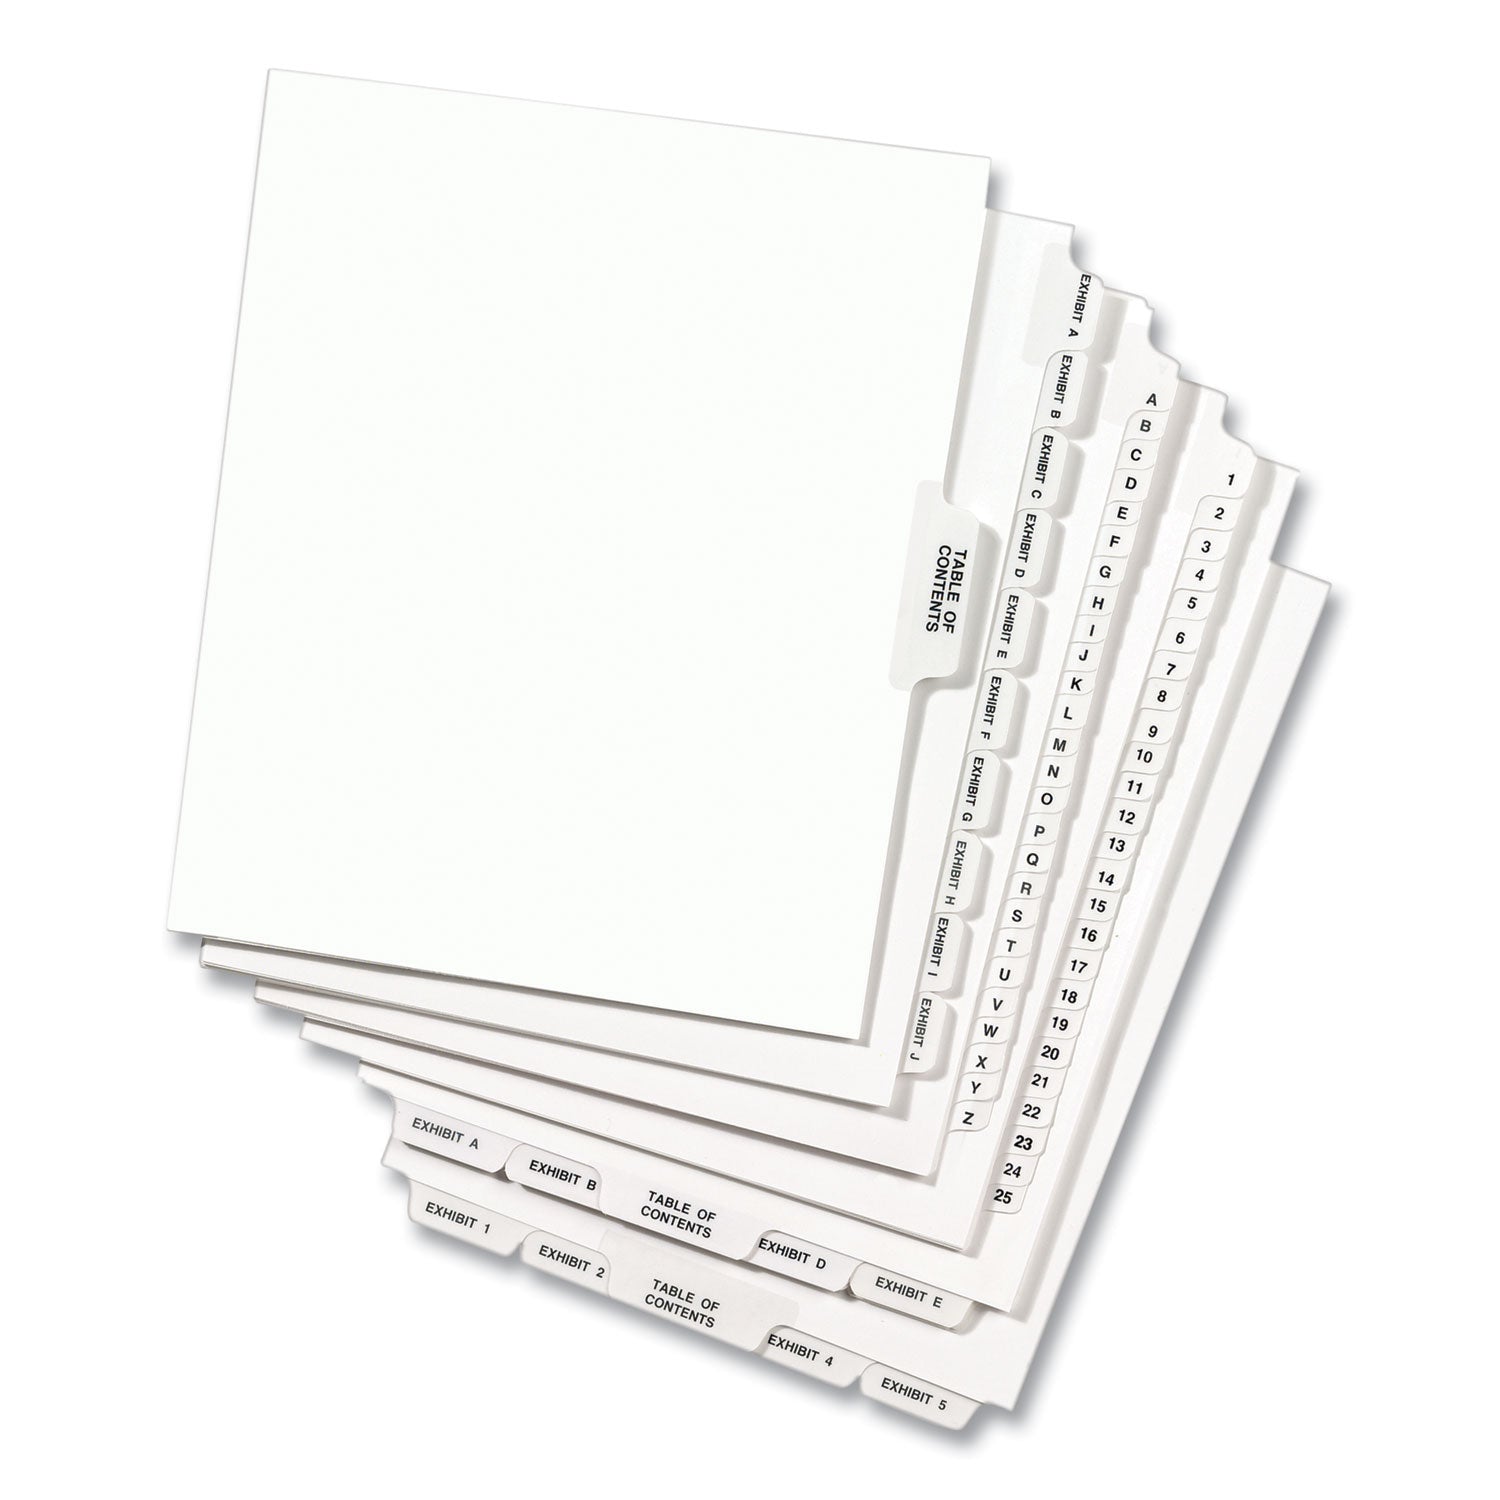 Preprinted Legal Exhibit Side Tab Index Dividers, Avery Style, 25-Tab, 251 to 275, 11 x 8.5, White, 1 Set, (1340) - 